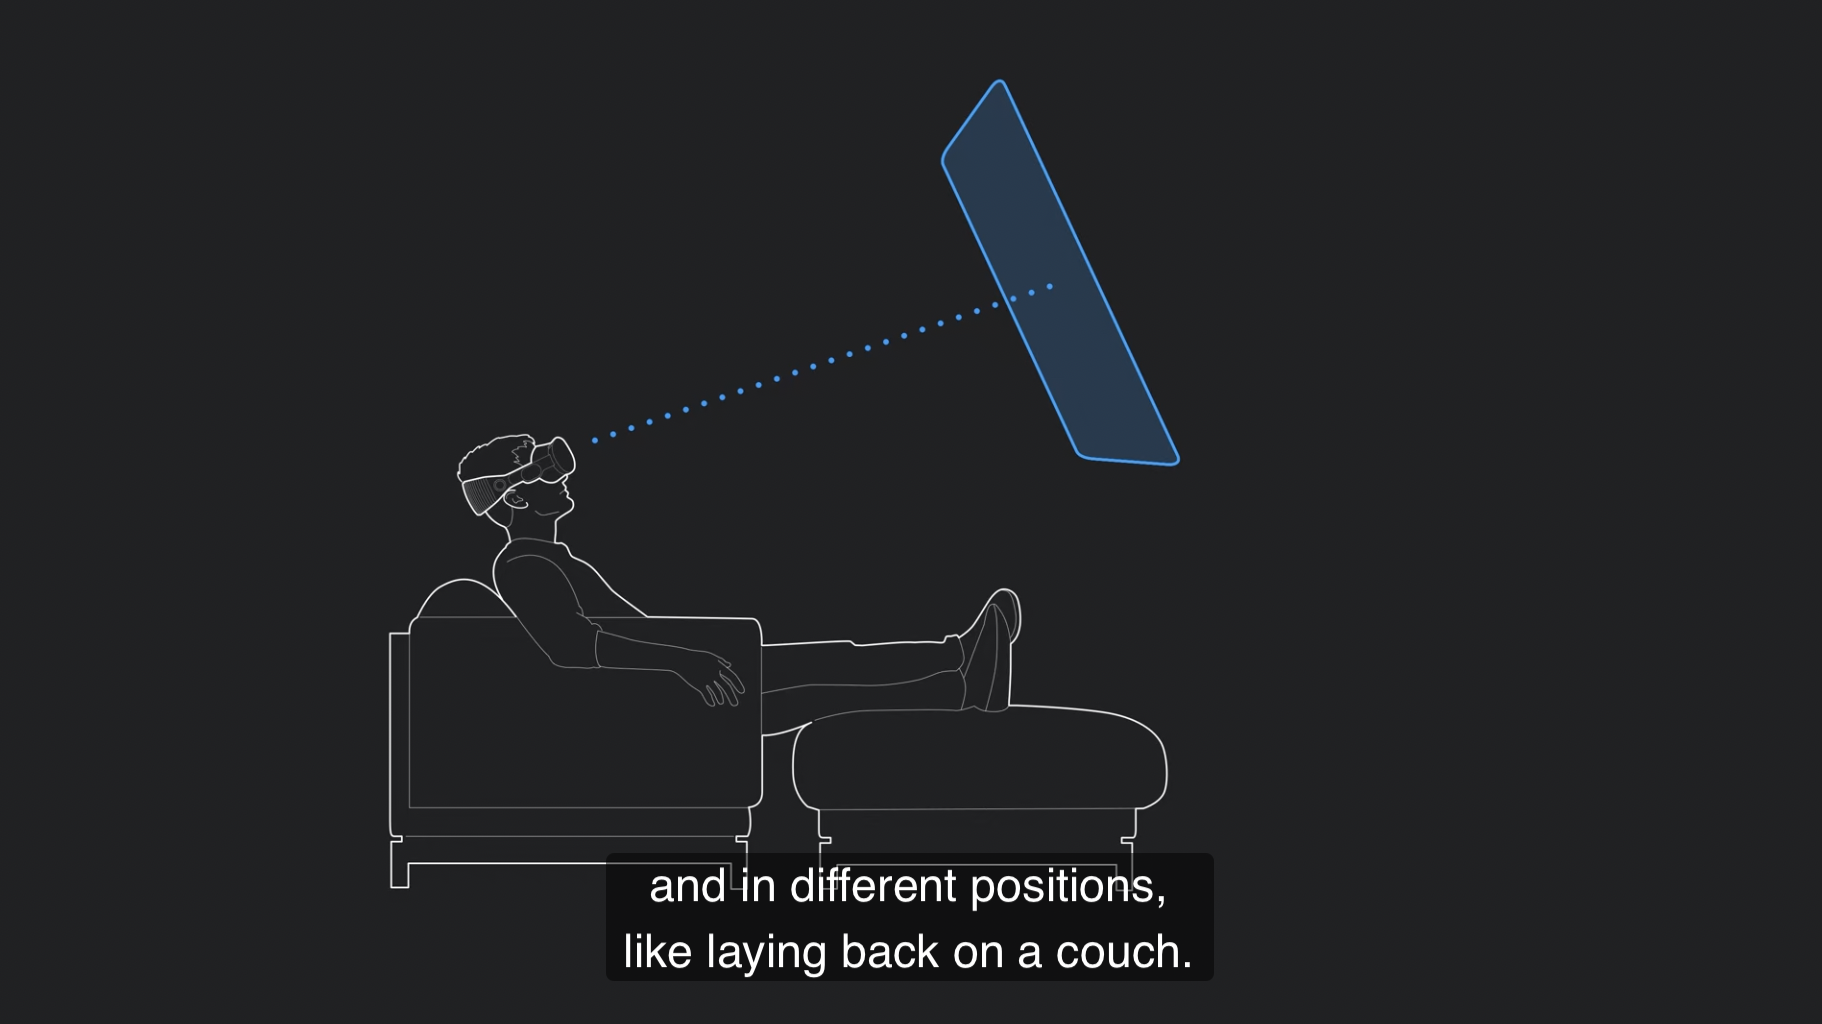 Screenshot of a still from an Apple development video, showing a person looking at a screen and subtitle that includes "laying back on a couch"